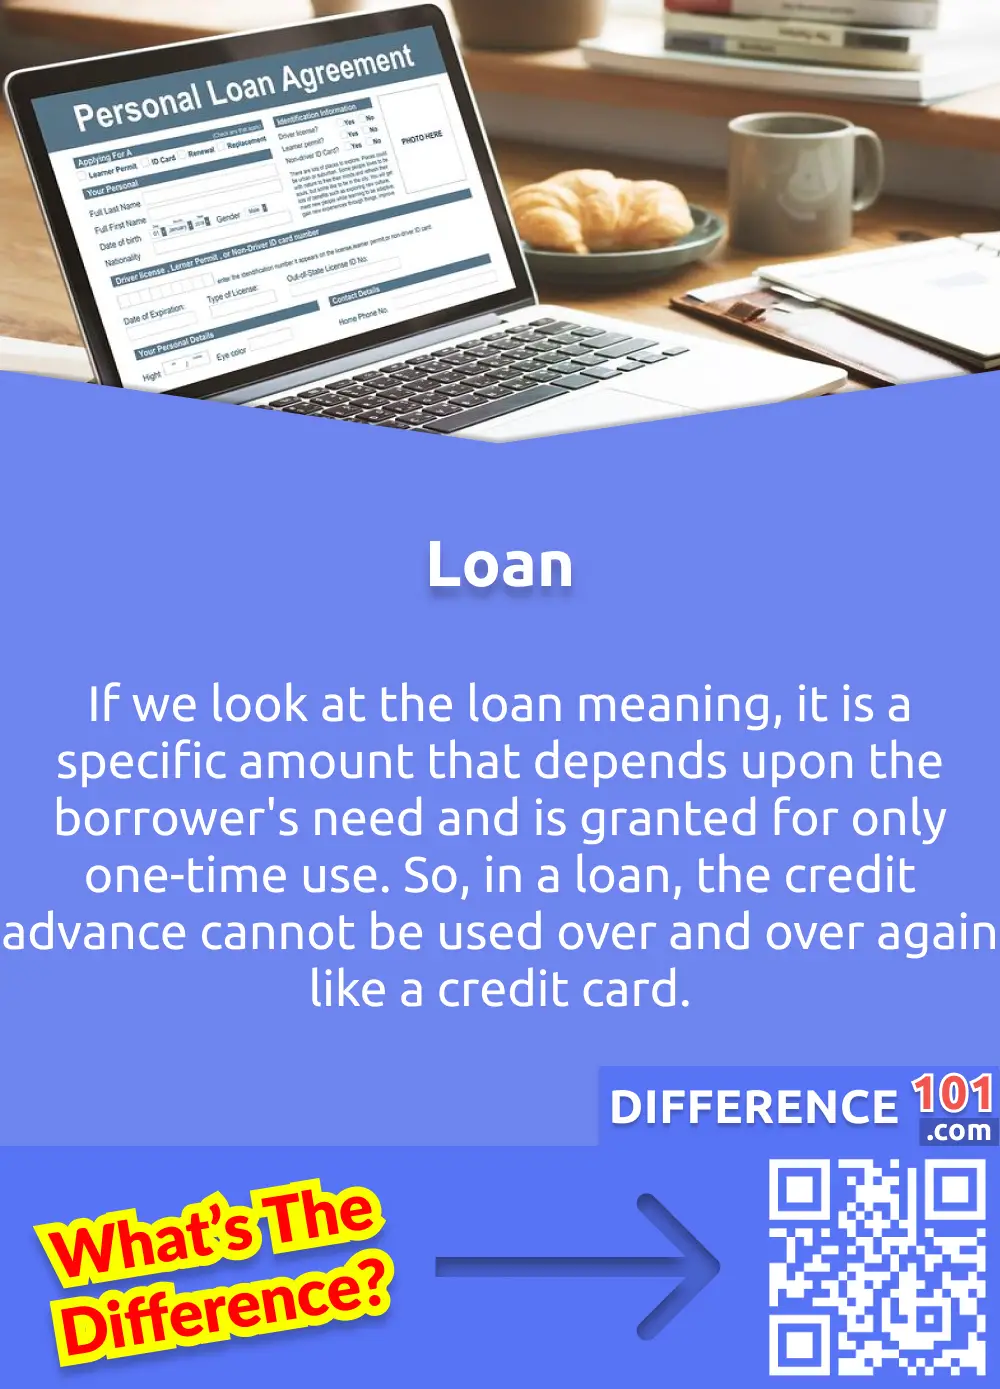 What Is A Loan? If we look at the loan meaning, it is a specific amount that depends upon the borrower's need and is granted for only one-time use. So, in a loan, the credit advance cannot be used over and over again like a credit card. Loans can be of two types, secured or unsecured. A fast loan is one which is backed by some type of collateral; for example, a car loan is secured by the vehicle, and if the borrower is not able to fulfill the financial demands, then the lender can repossess the car, sell it and have the remaining loan balance. On the other hand, an unsecured loan is not backed up with any kind of collateral, and the approval of these loans relies only on borrowers' credit history. Secured loans have lower interest rates, while unsecured loans have higher interest rates.
